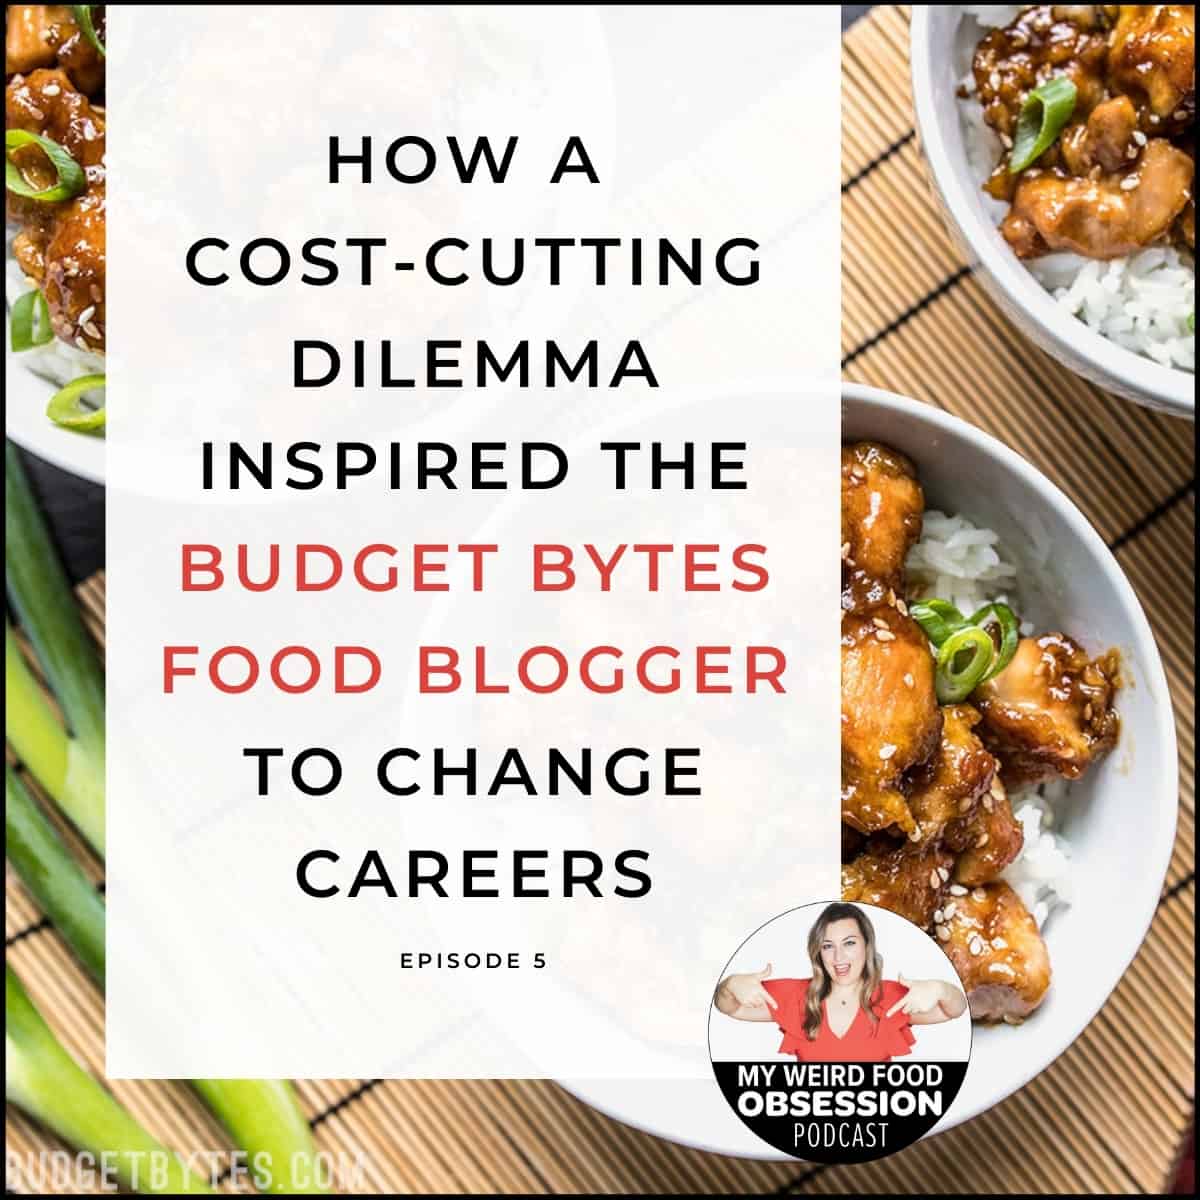 https://sipbitego.com/wp-content/uploads/2021/02/my-weird-food-obsession-podcast-episode-5-Cost-Cutting-Dilema-Inspired-Budget-Bytes-Food-Blogger-To-Change-Careers-1-feature.jpg